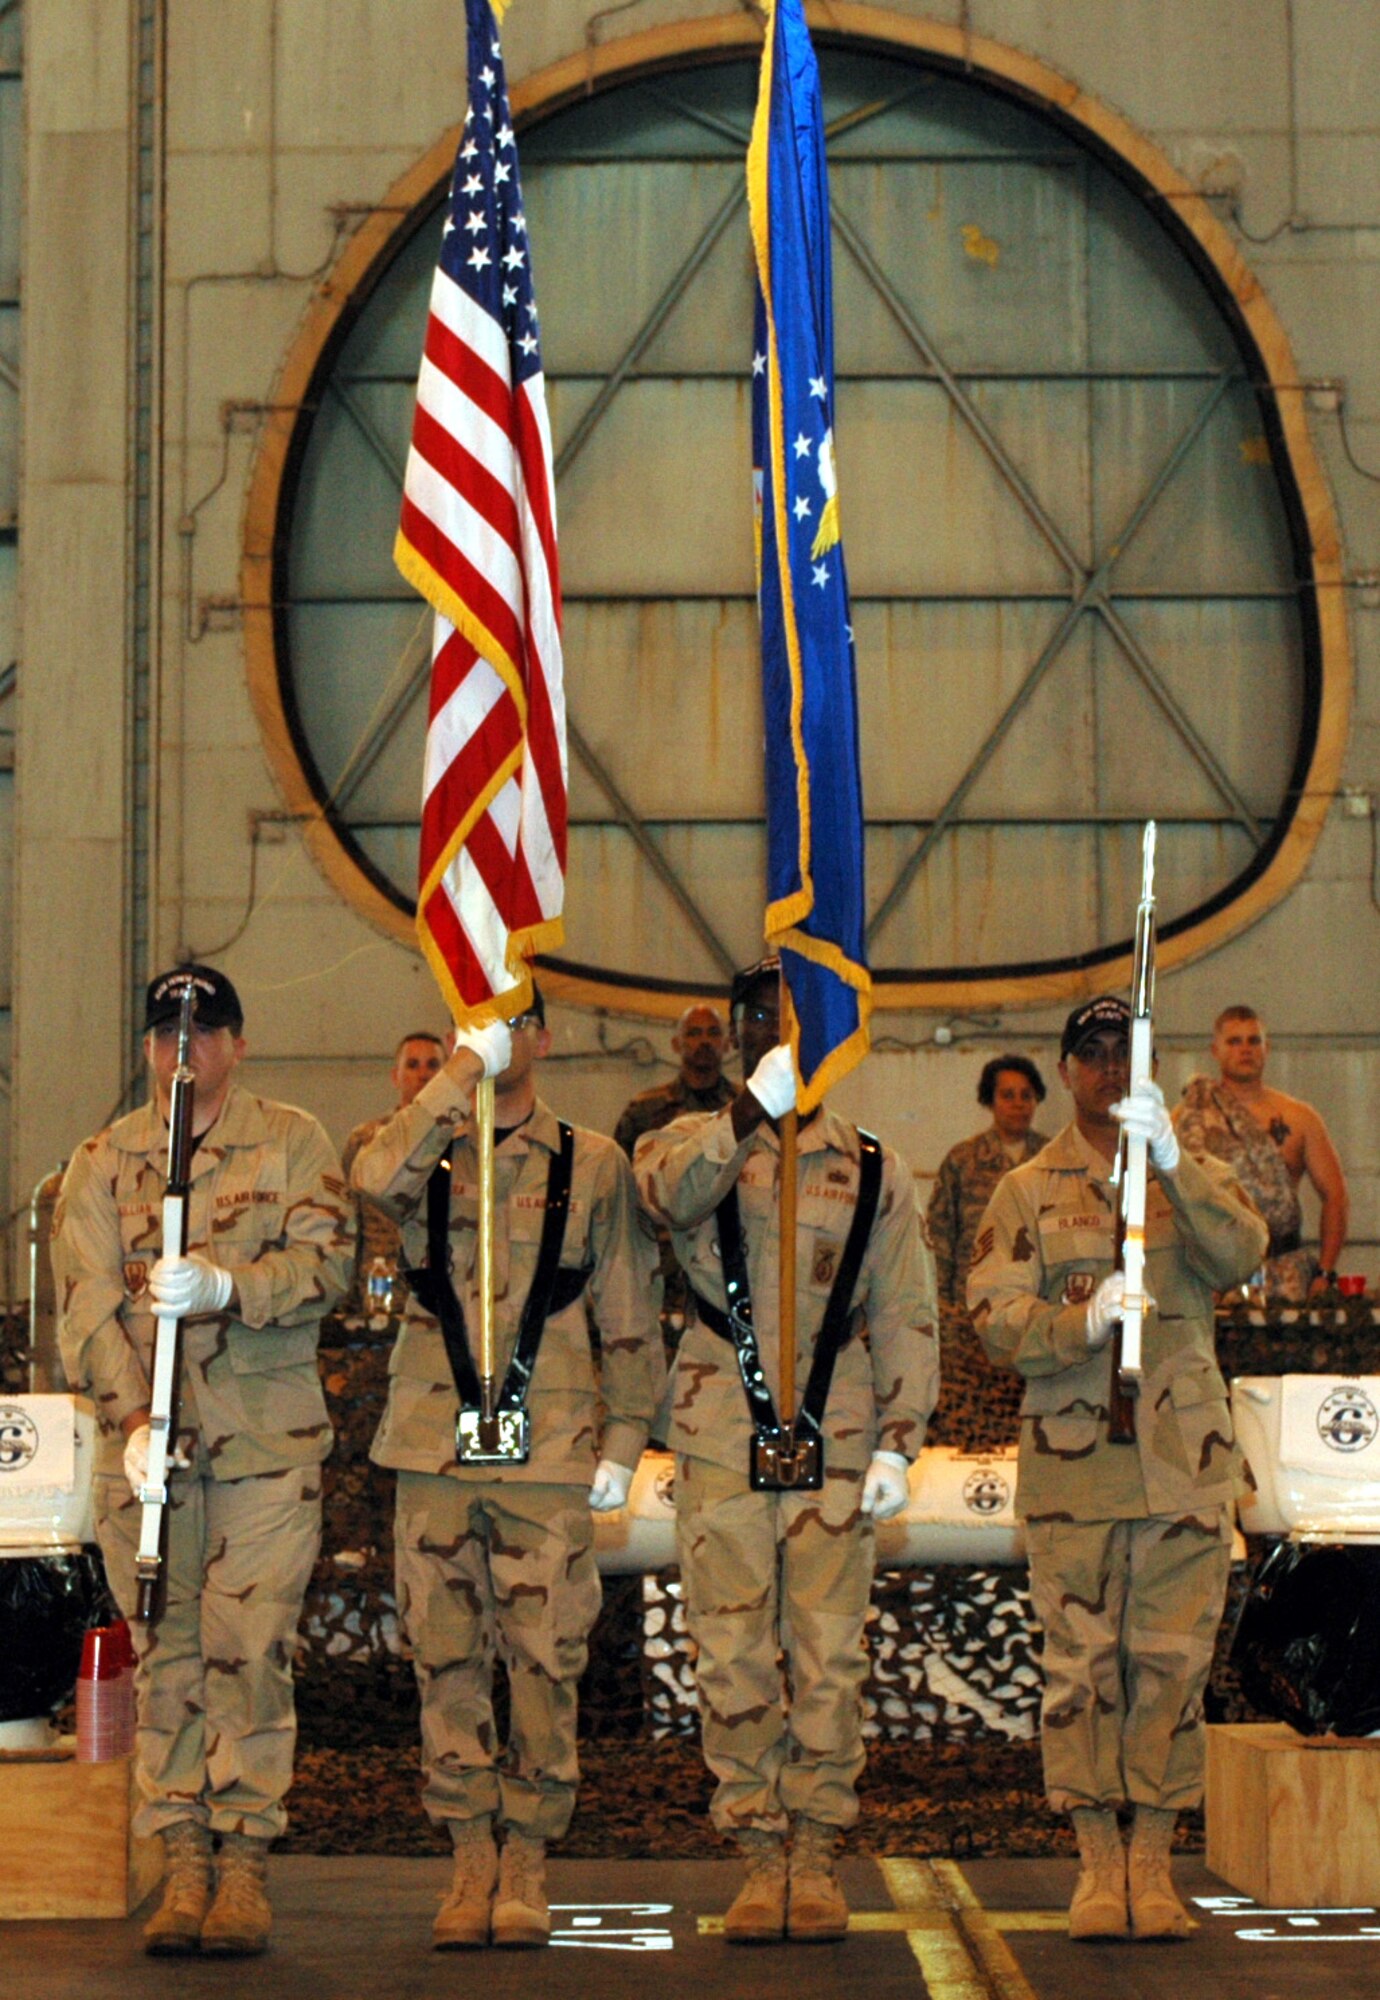 Members of the Travis Honor Guard post the colors prior to the beginning of the Enlisted Combat Dining-in “Welcome to the AOR 2008”, sponsored by the Travis Rising 6. (U.S. Air Force photo/Senior Airman Shaun Emery)